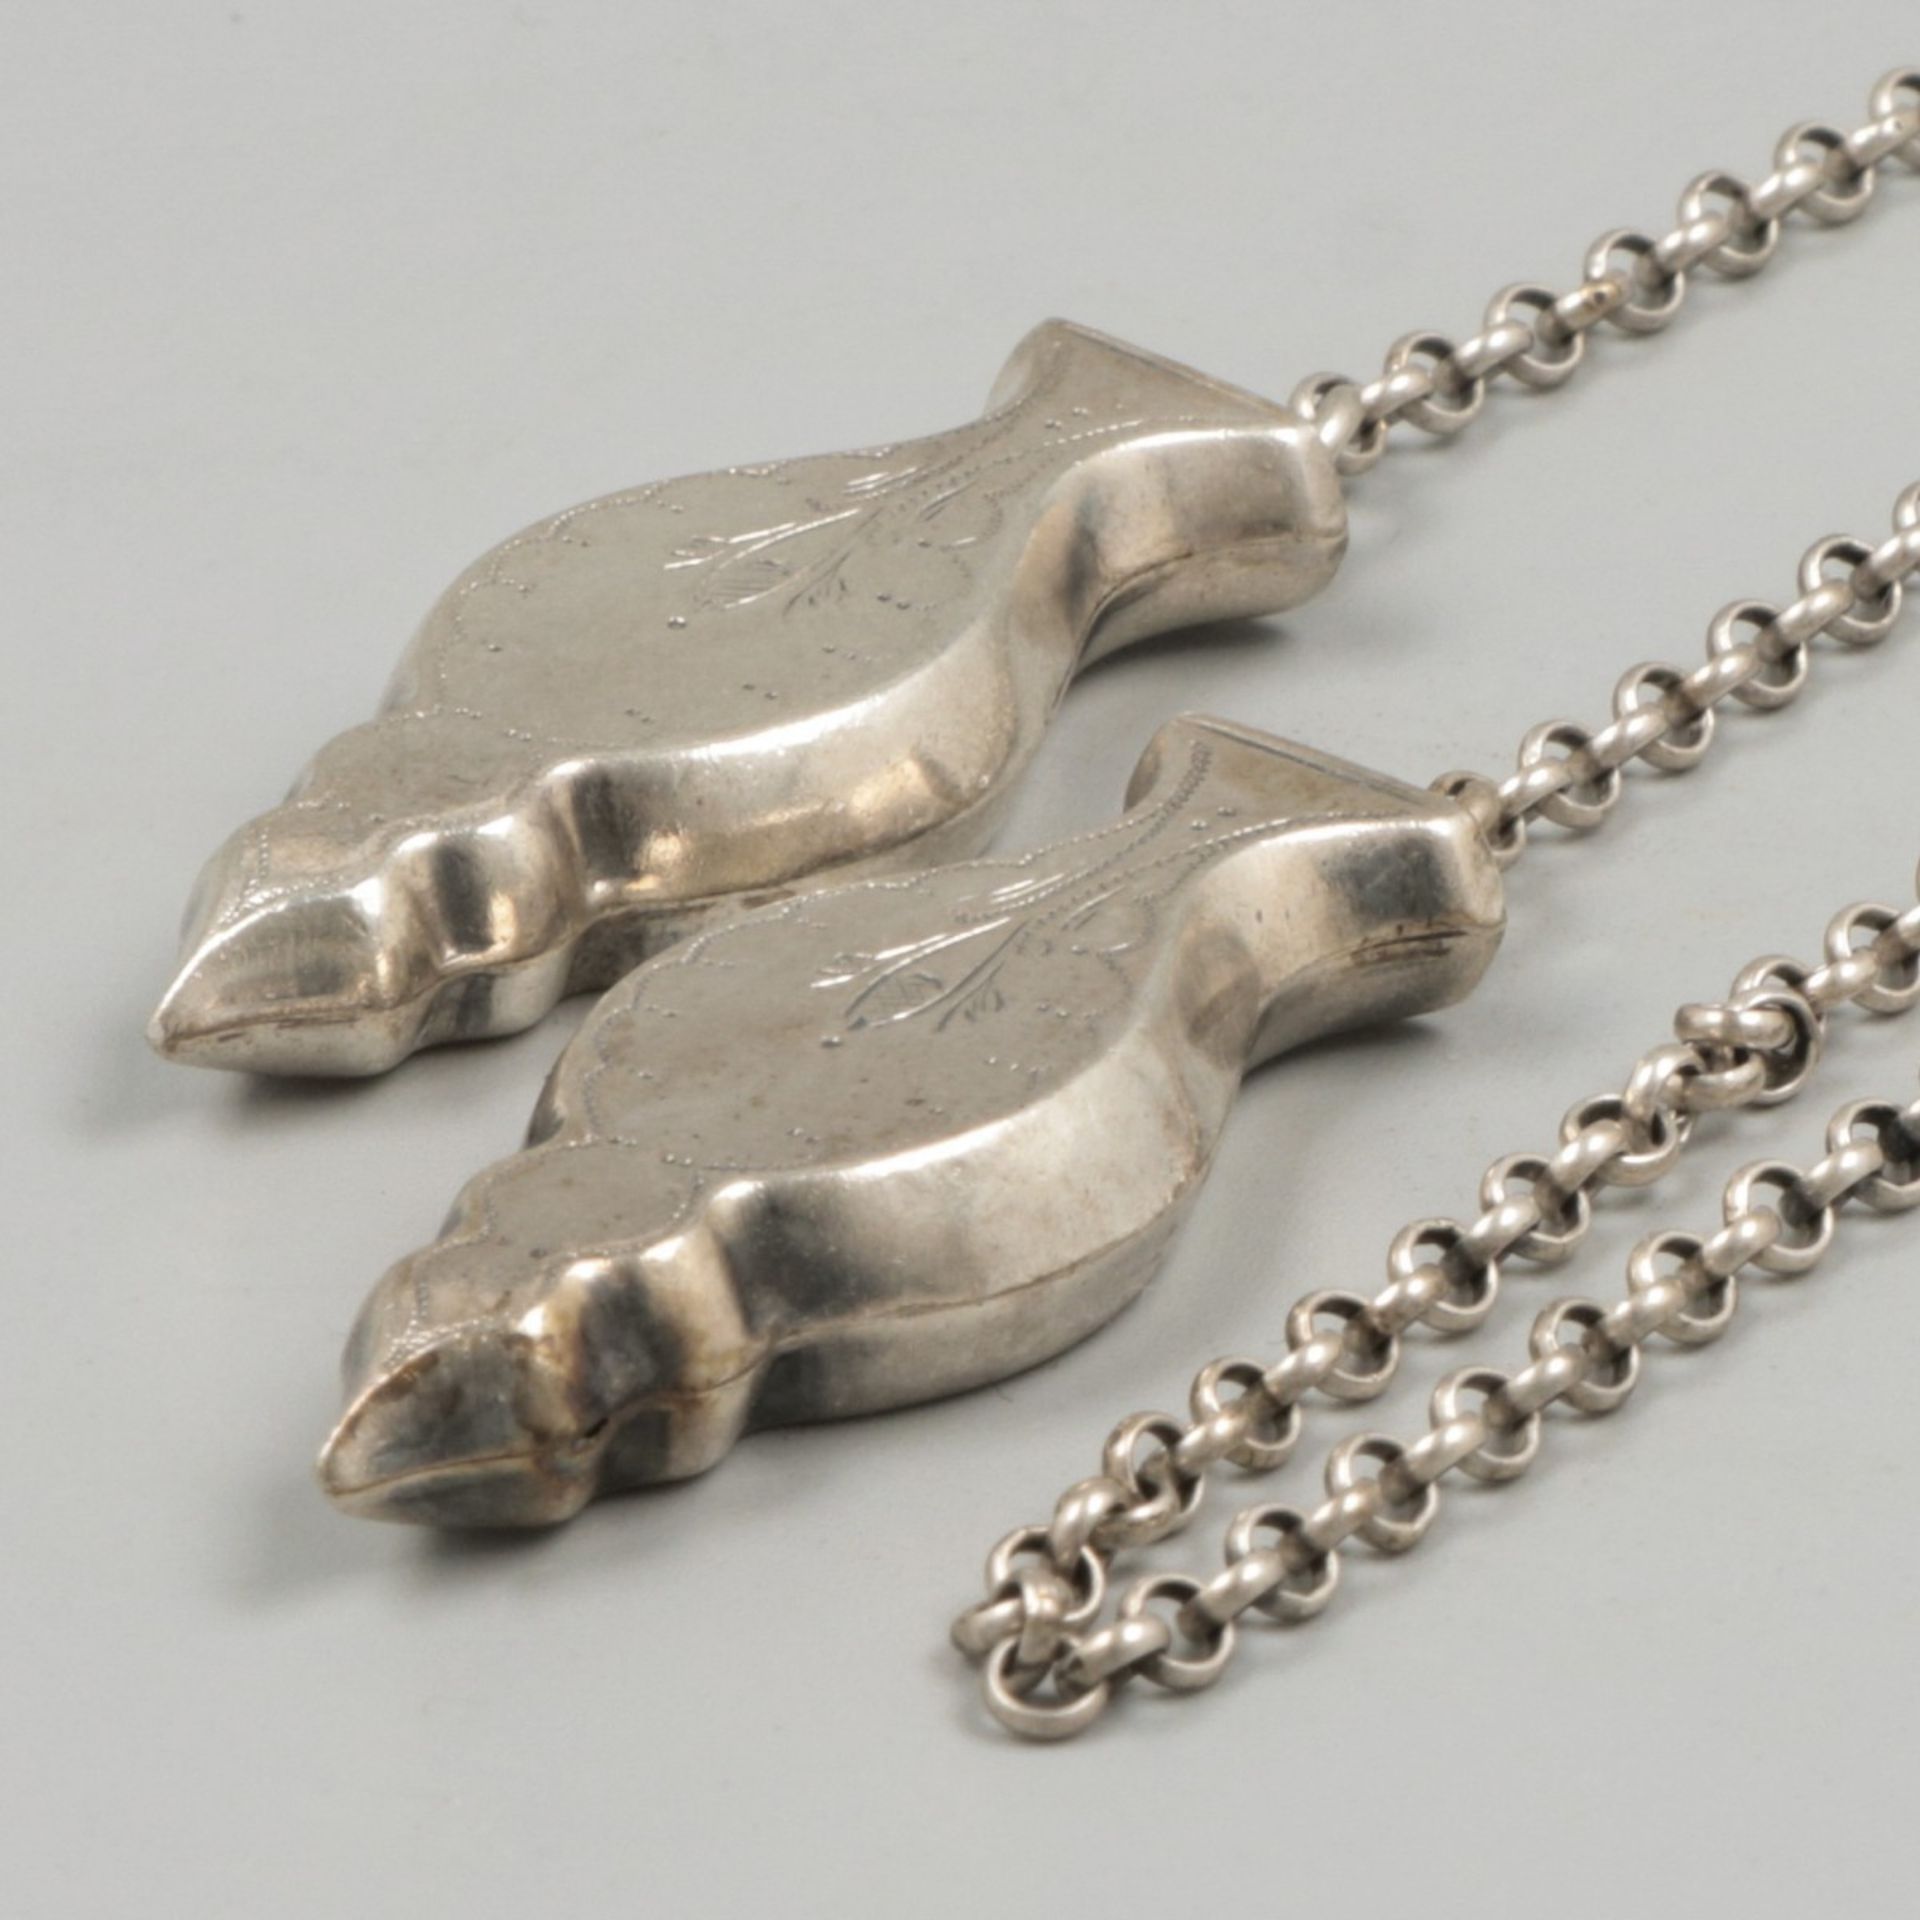 2-piece lot jasseron chains with knitting caps silver. - Image 2 of 5